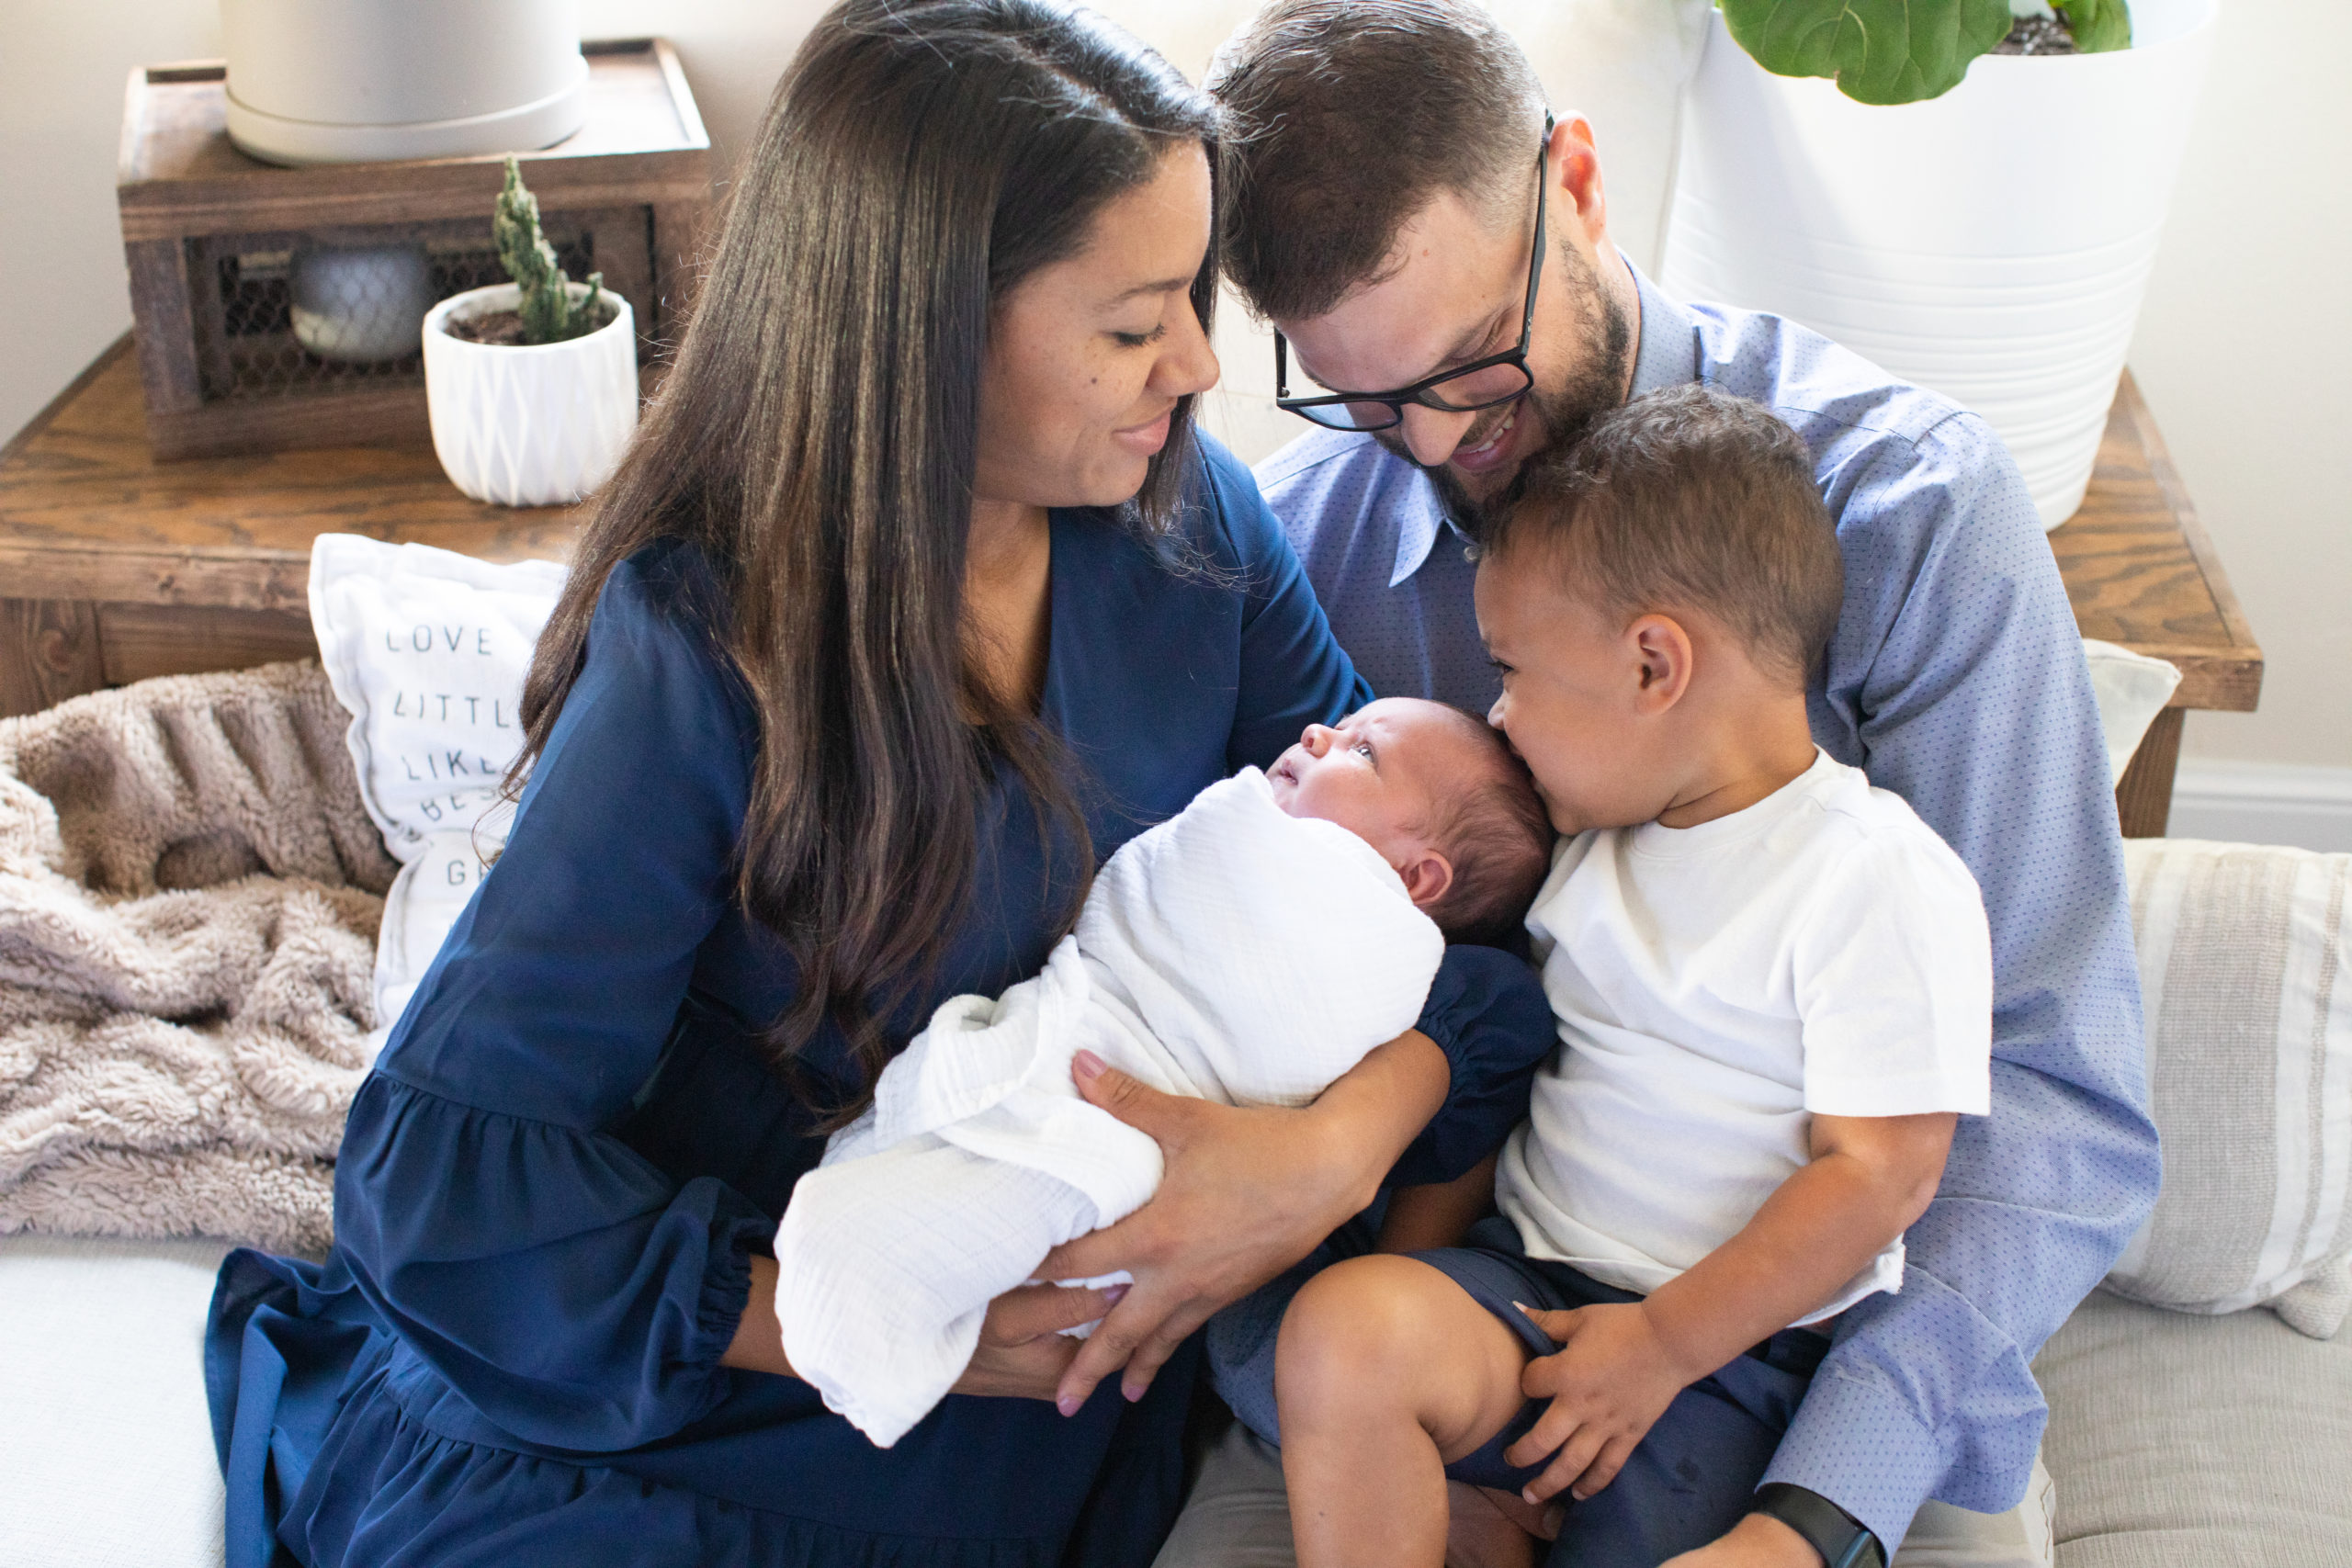 Mom in navy blue dress holds newborn baby boy, while dad in light blue shirt holds older son. They are all cuddled together on cushions